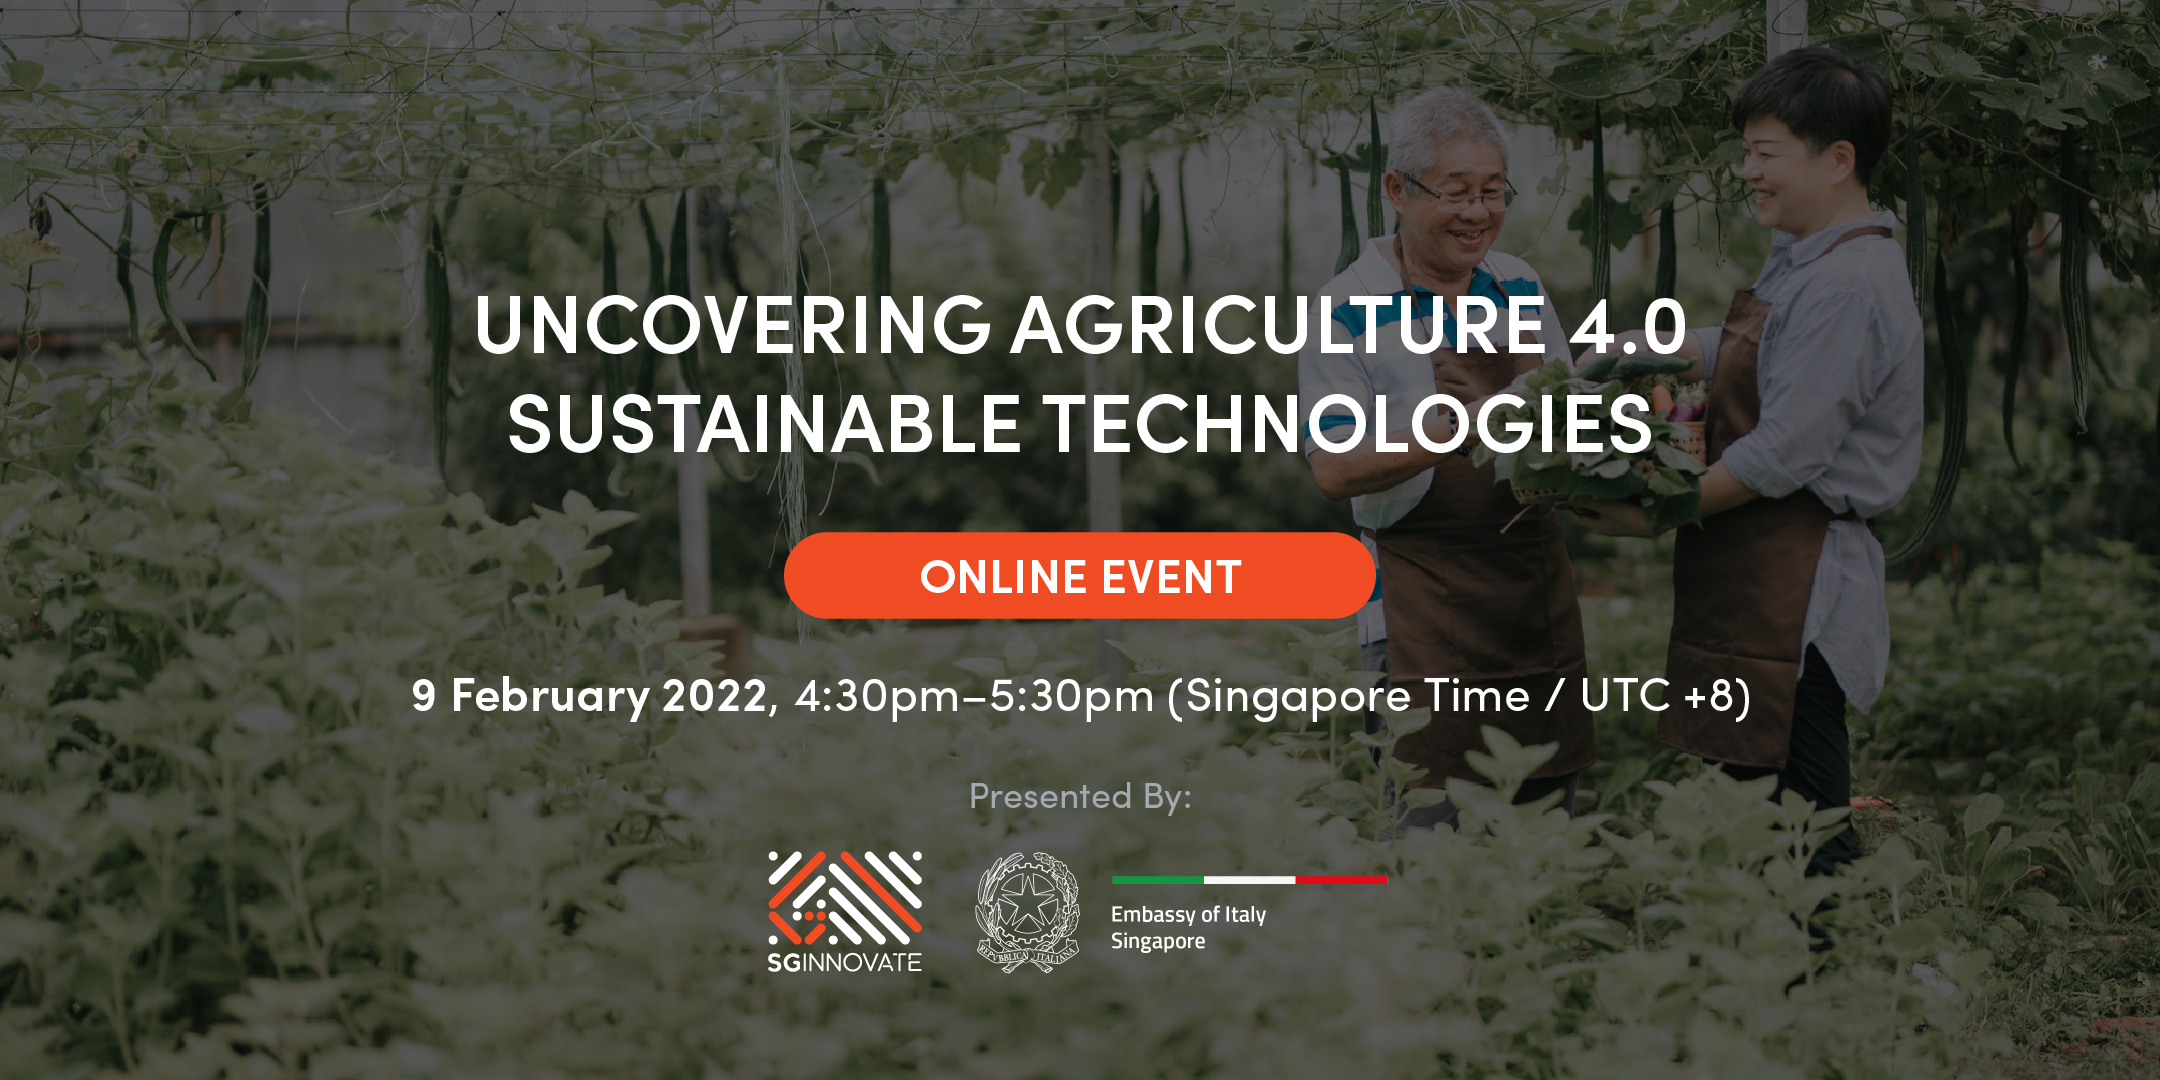 Uncovering Agriculture 4.0 Sustainable Technologies